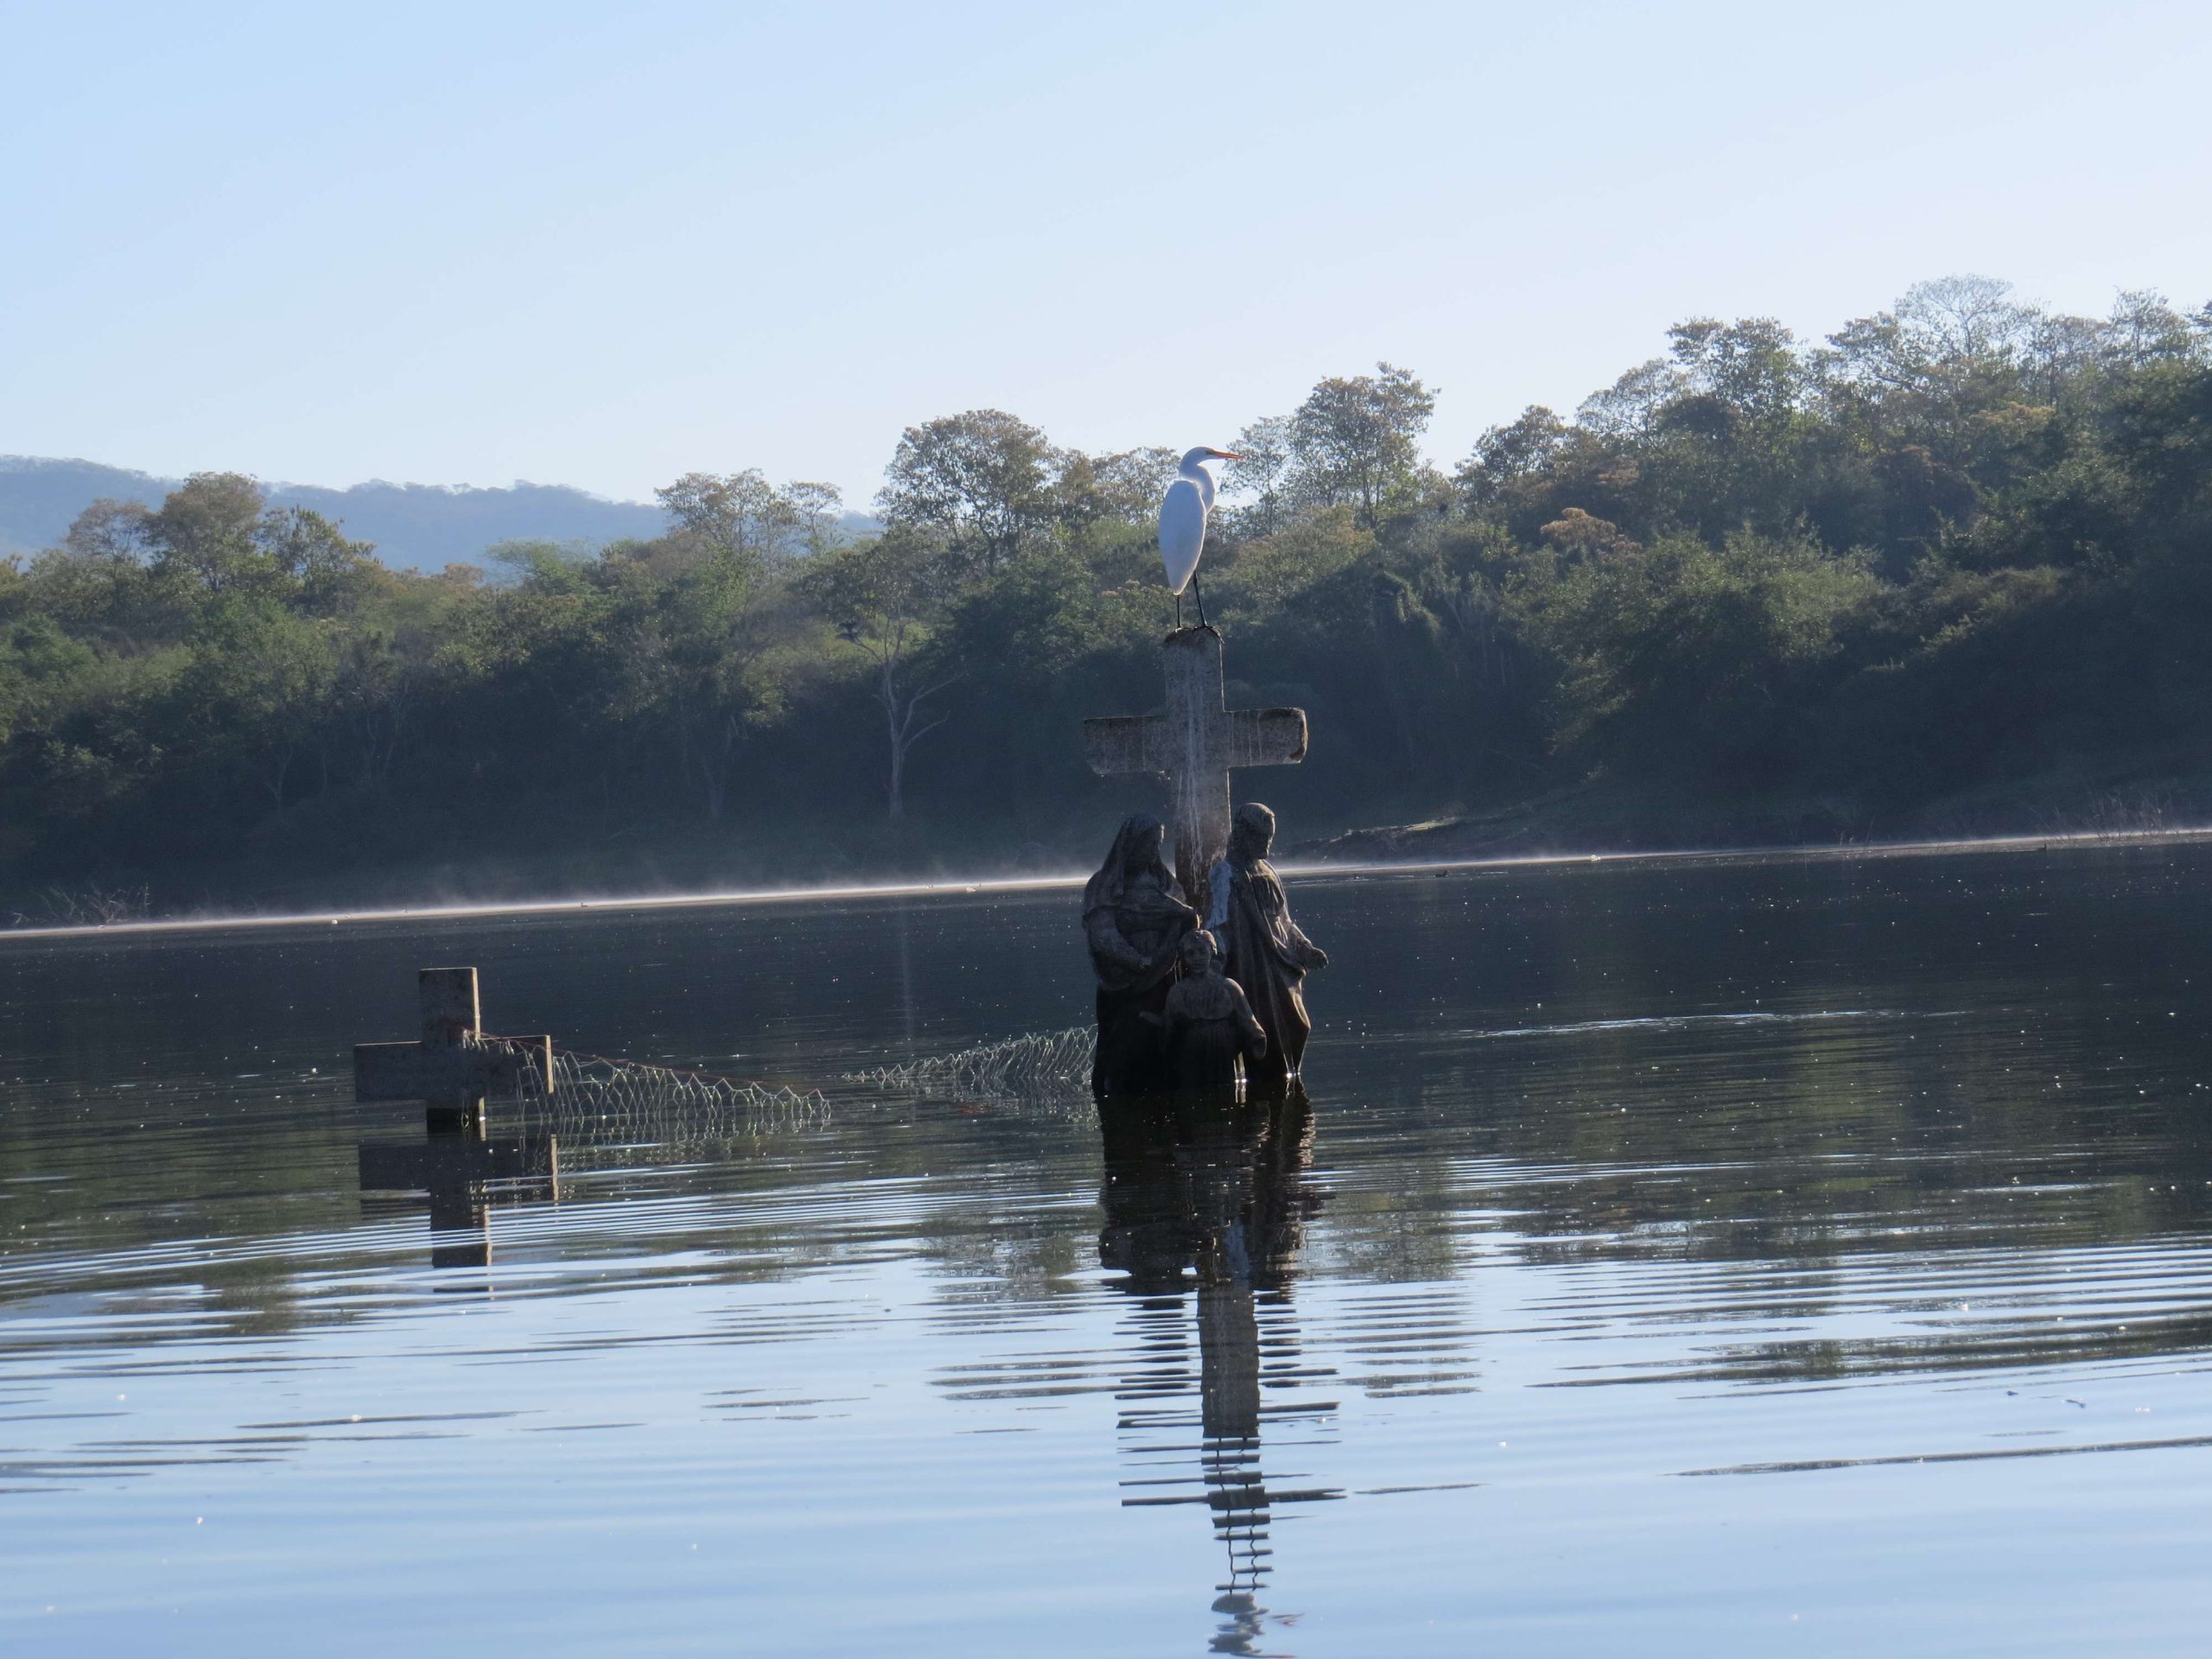 The El Salto wildlife and scenery make for some compelling situations.